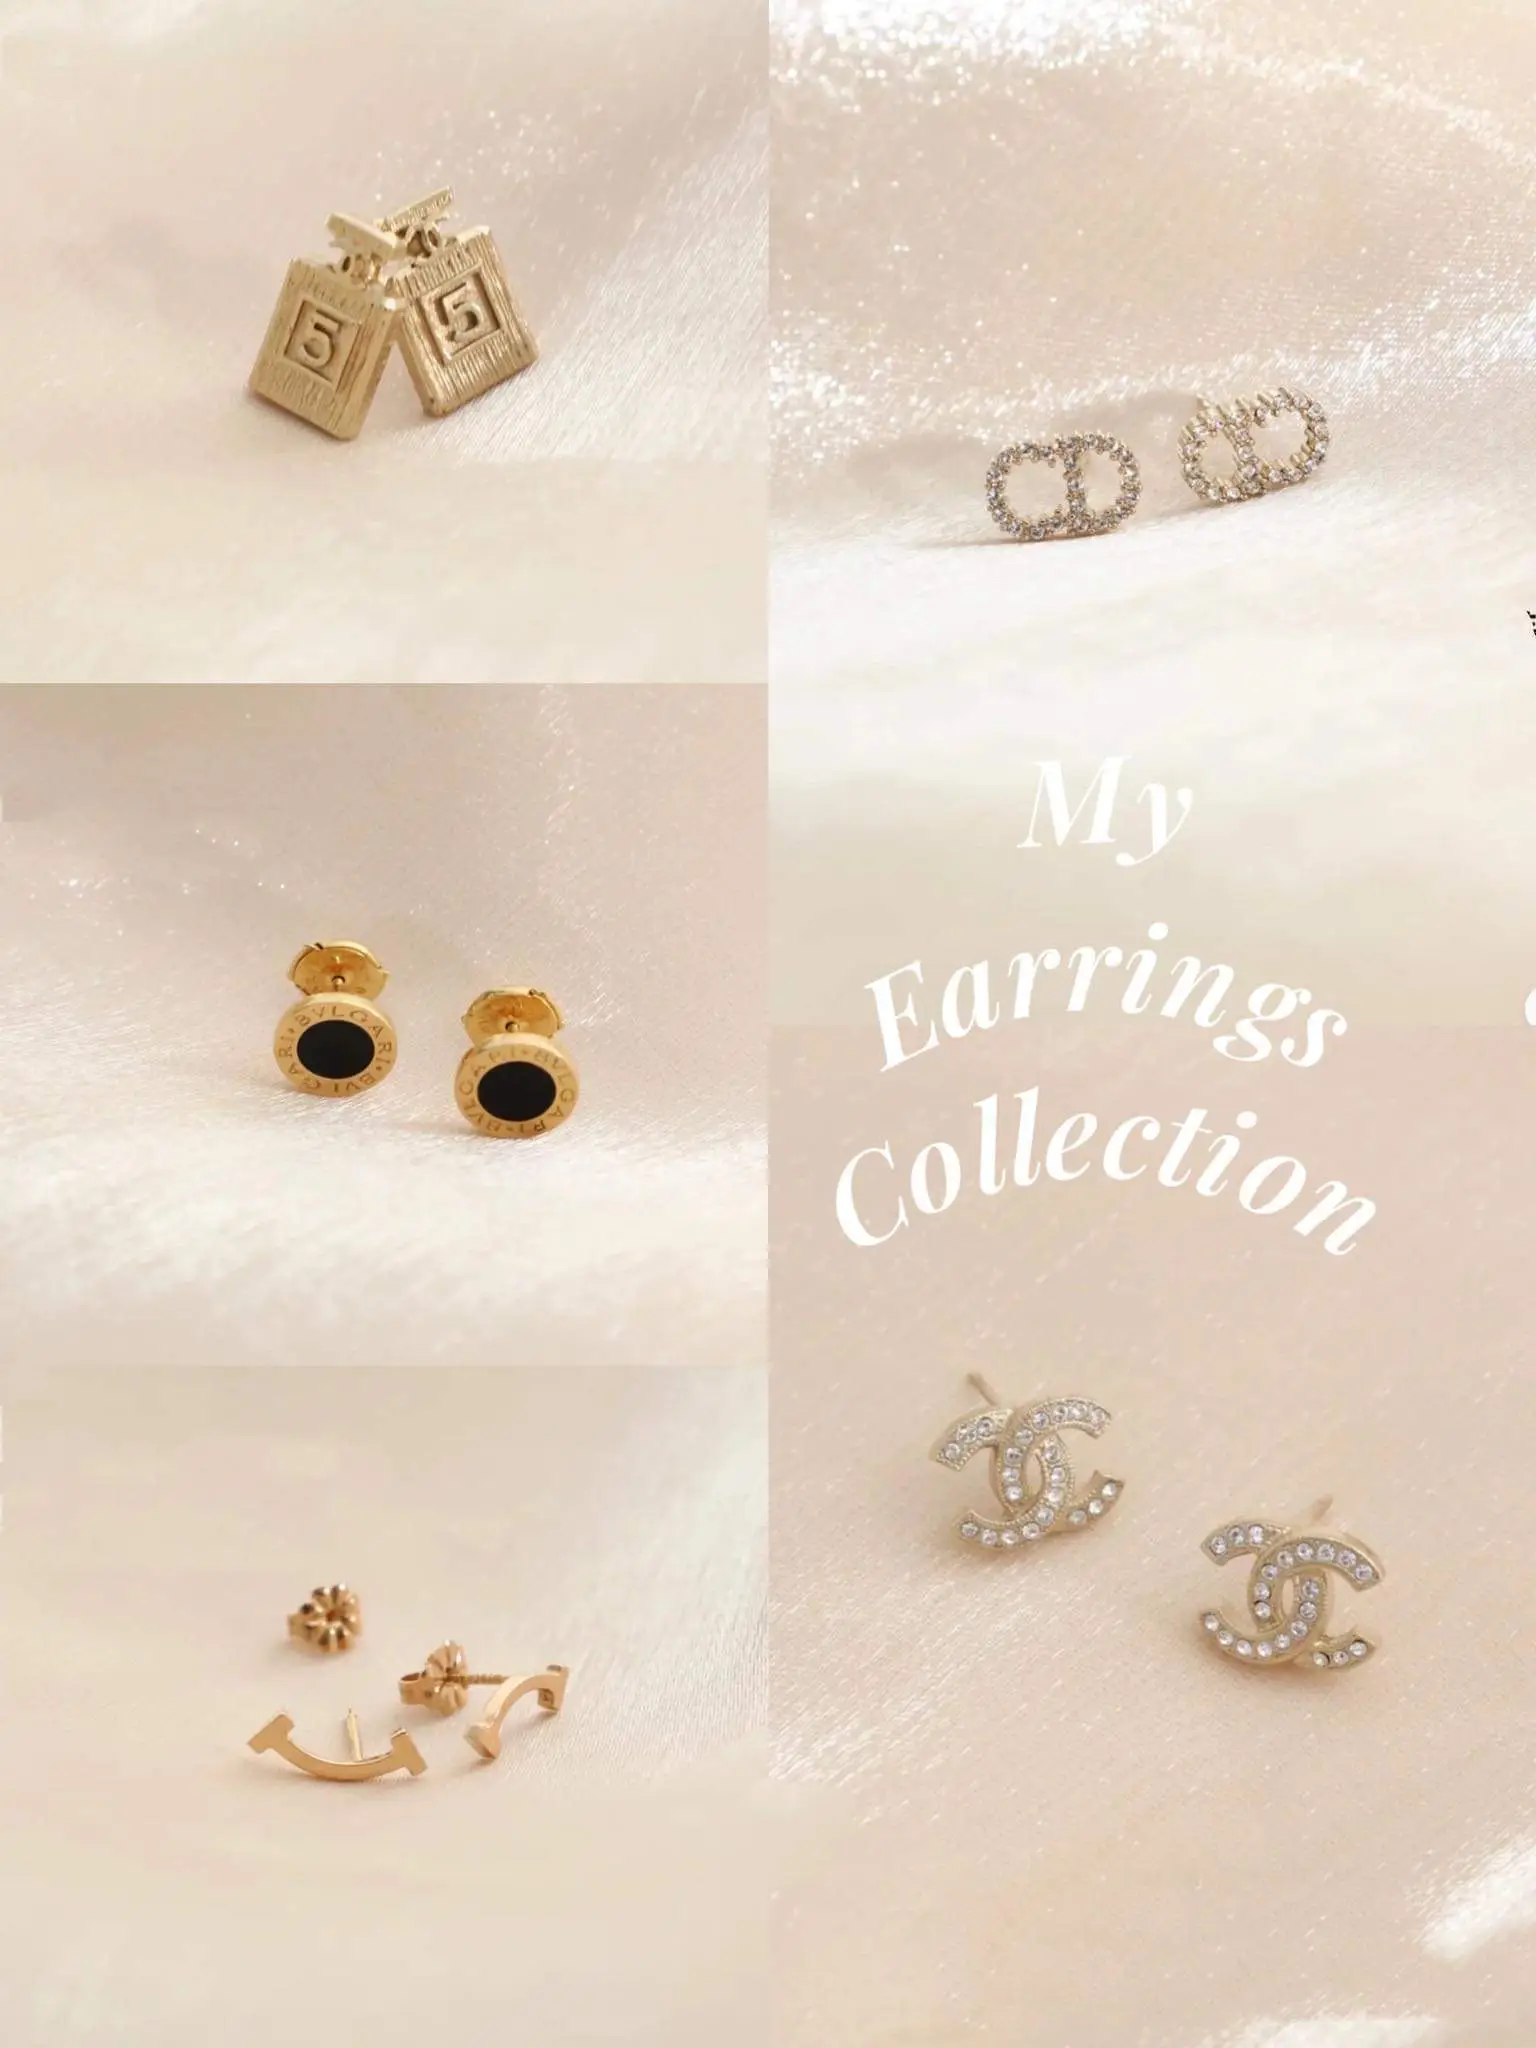 My earrings collection, Gallery posted by Julia Shenniah